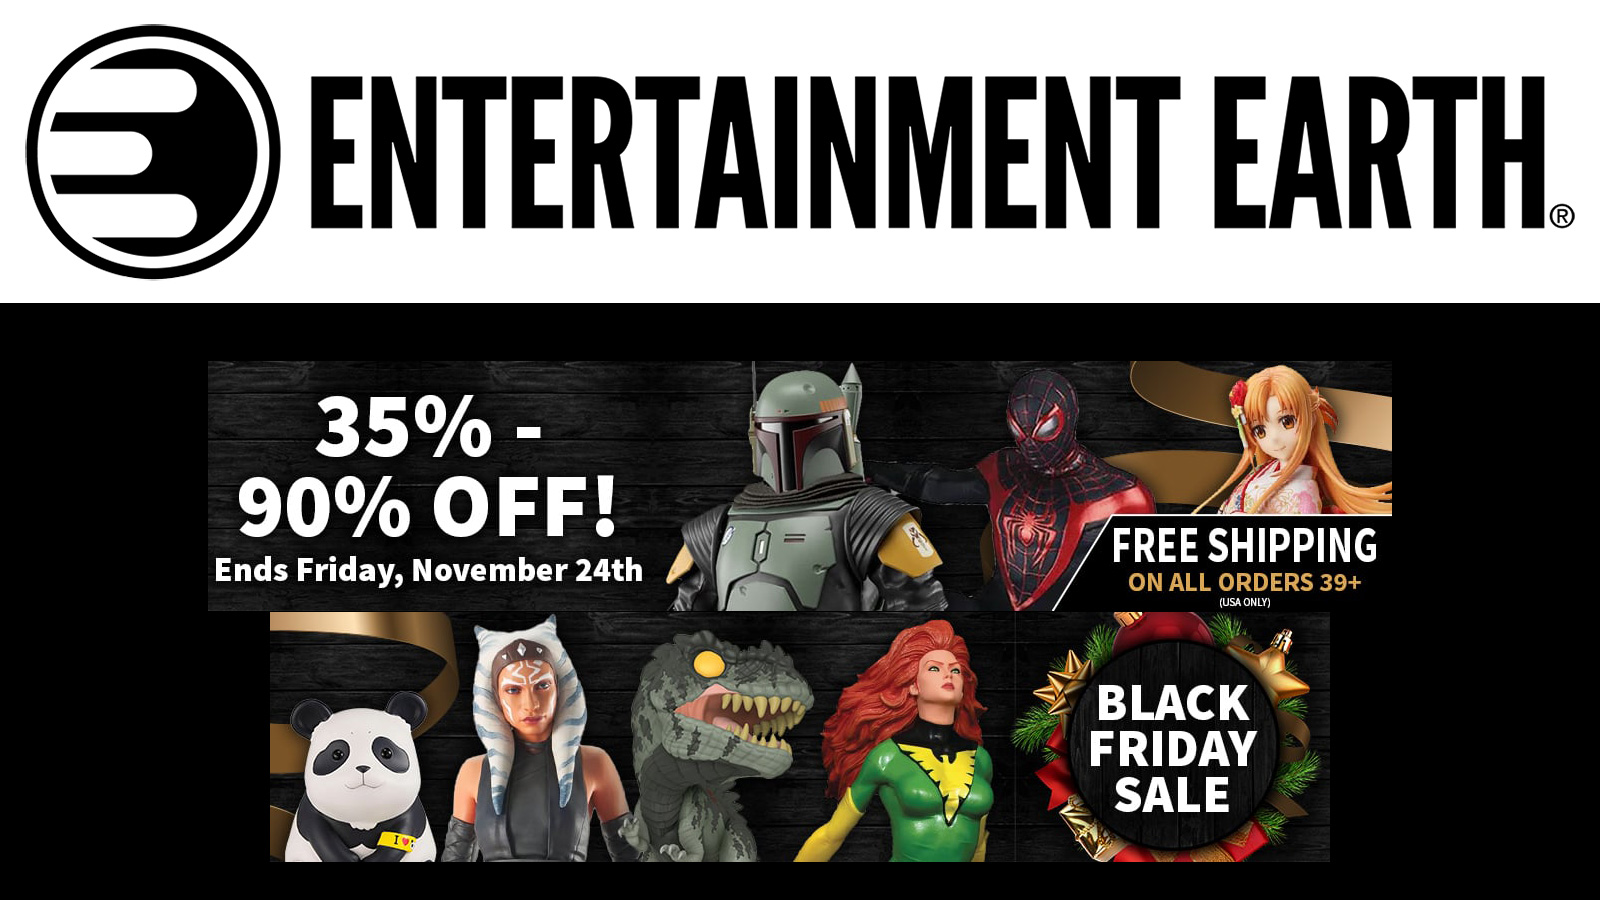 Entertainment Earth’s 2023 Black Friday Sale Begins & Free Shipping On Orders Of $39+